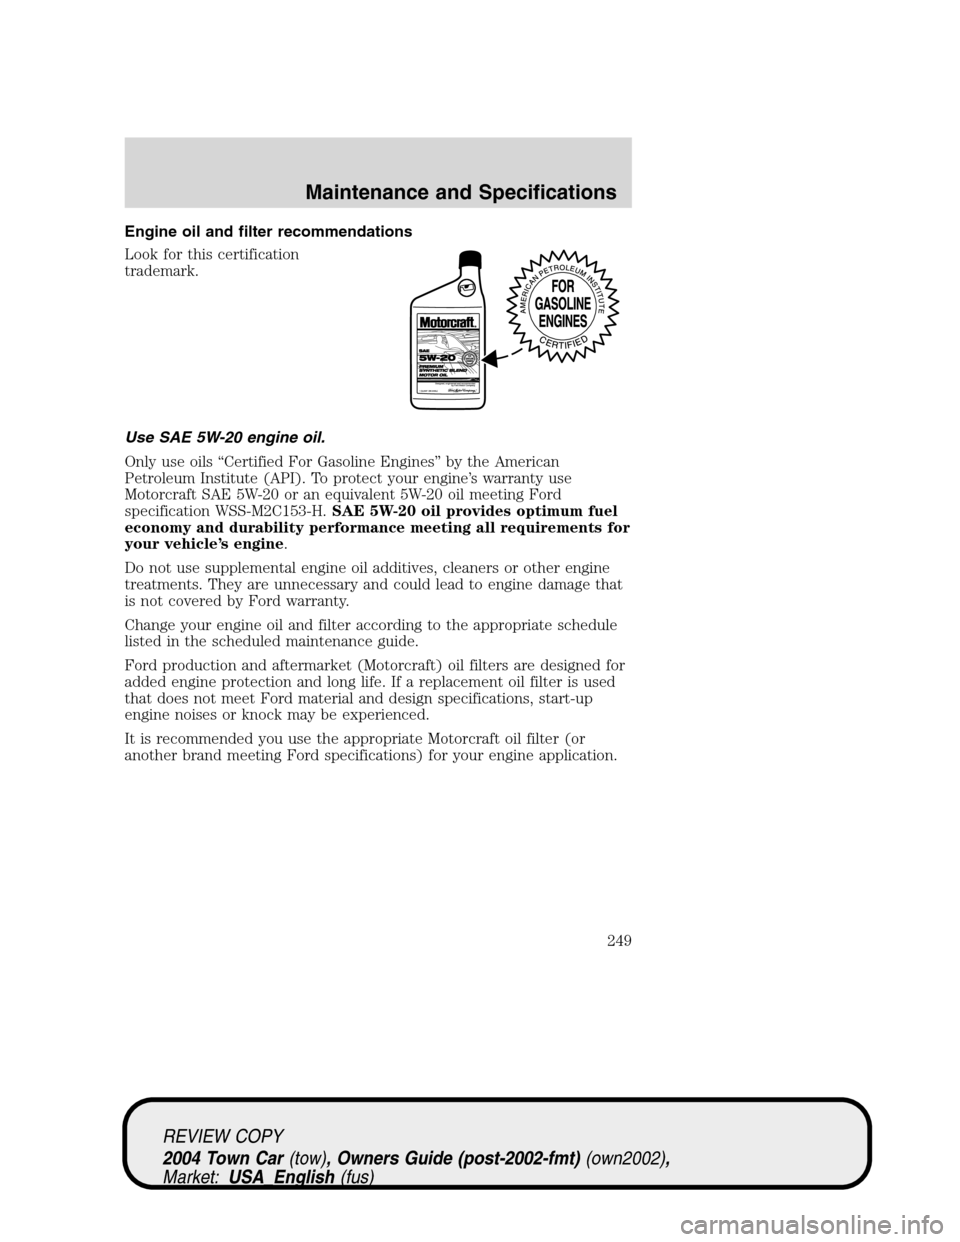 LINCOLN TOWN CAR 2004  Owners Manual Engine oil and filter recommendations
Look for this certification
trademark.
Use SAE 5W-20 engine oil.
Only use oils“Certified For Gasoline Engines”by the American
Petroleum Institute (API). To pr